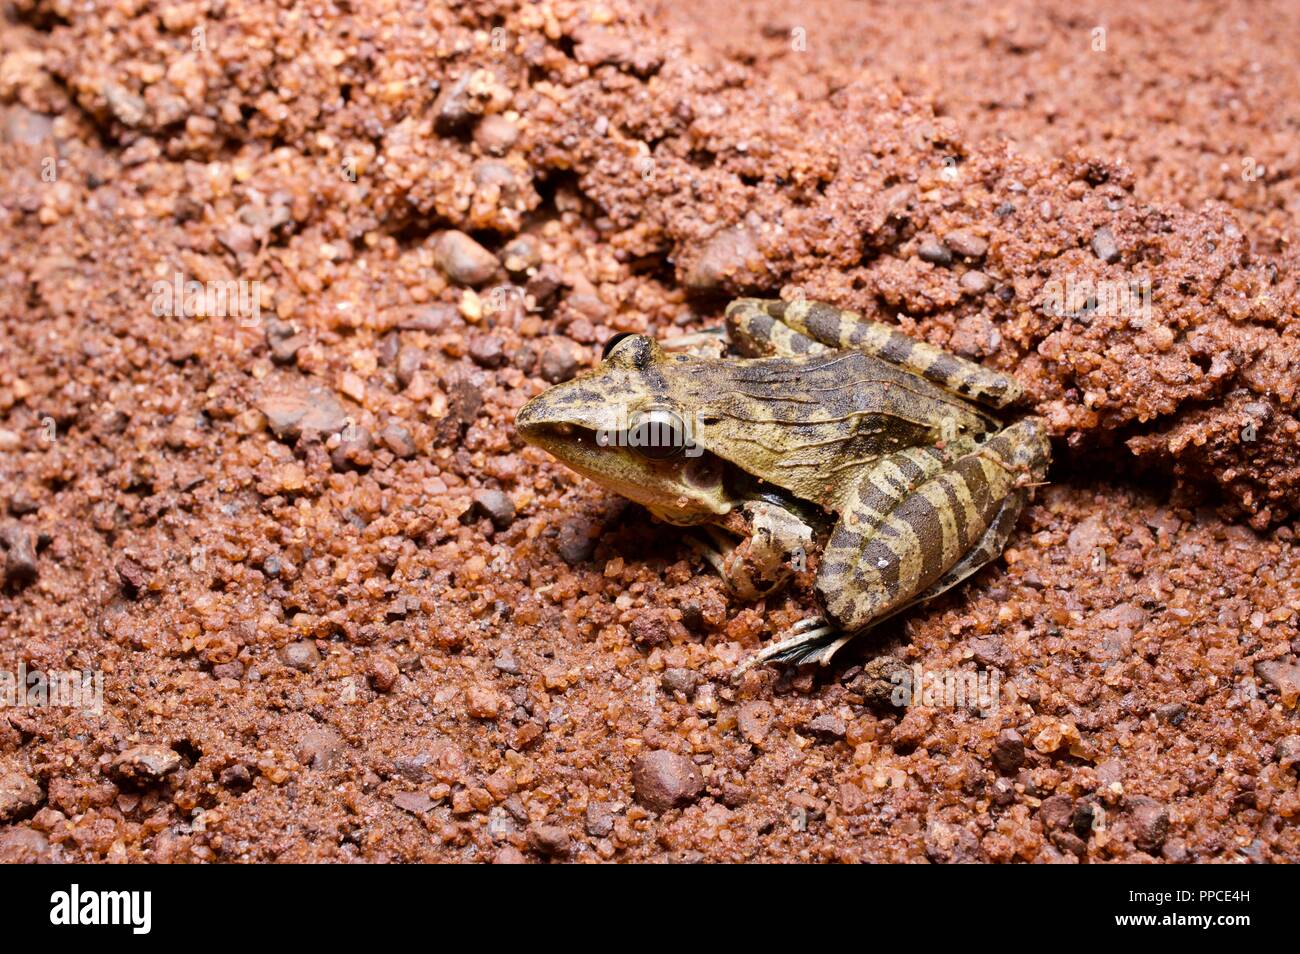 A Sharp-nosed Ridged Frog (Ptychadena oxyrhynchus) on a dirt path at night in Bobiri Forest Reserve, Ghana, Africa Stock Photo